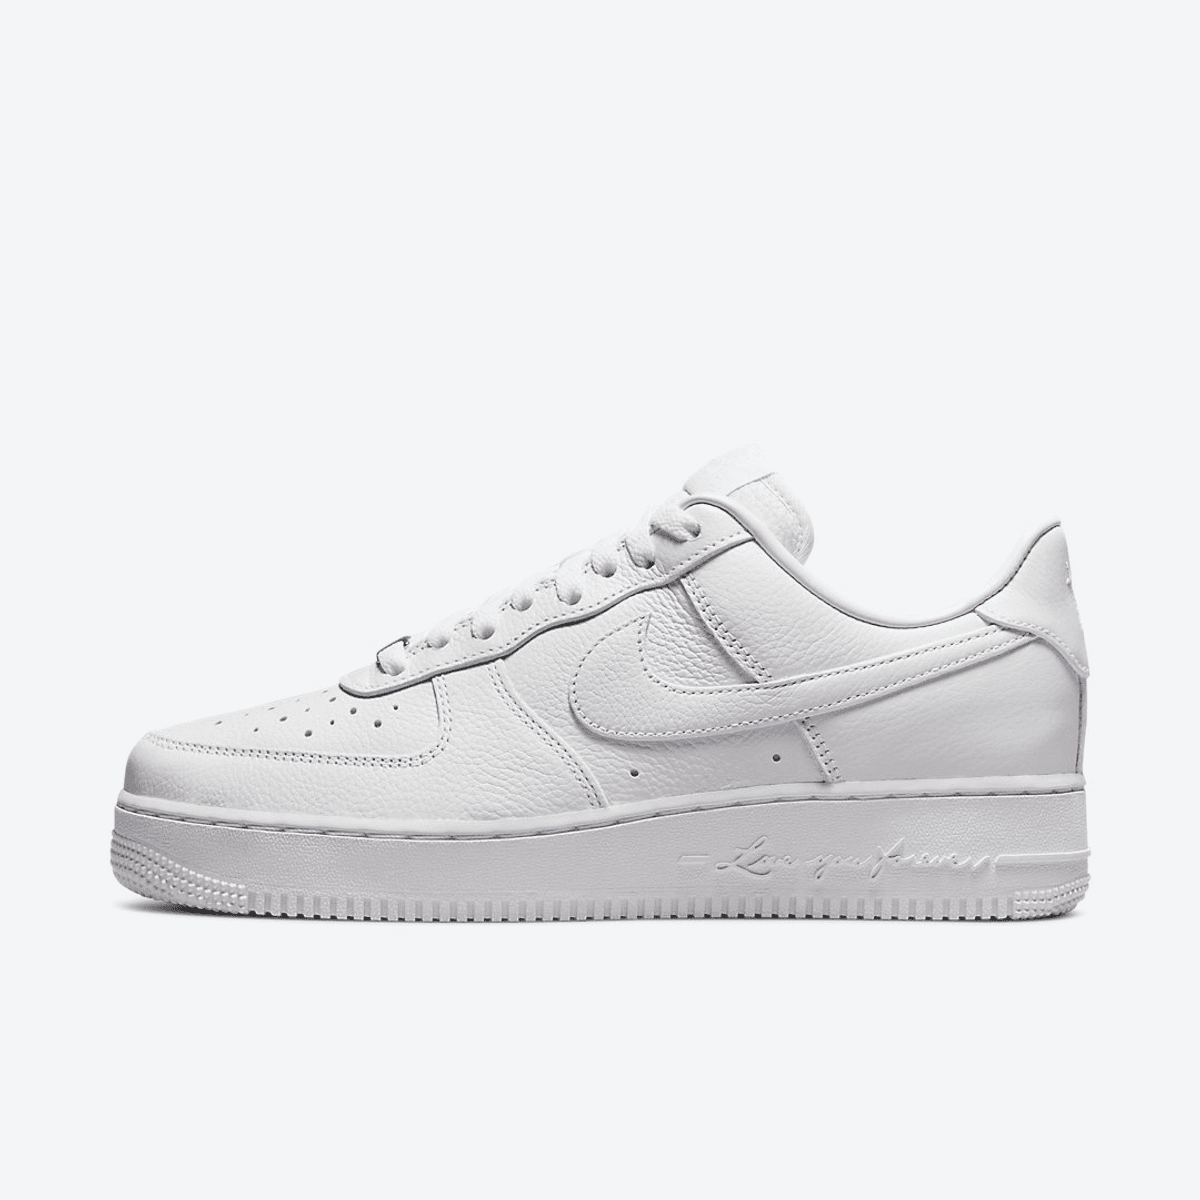 Be a "Certified Lover Boy" With The New NOCTA x Nike Air Force 1 Low